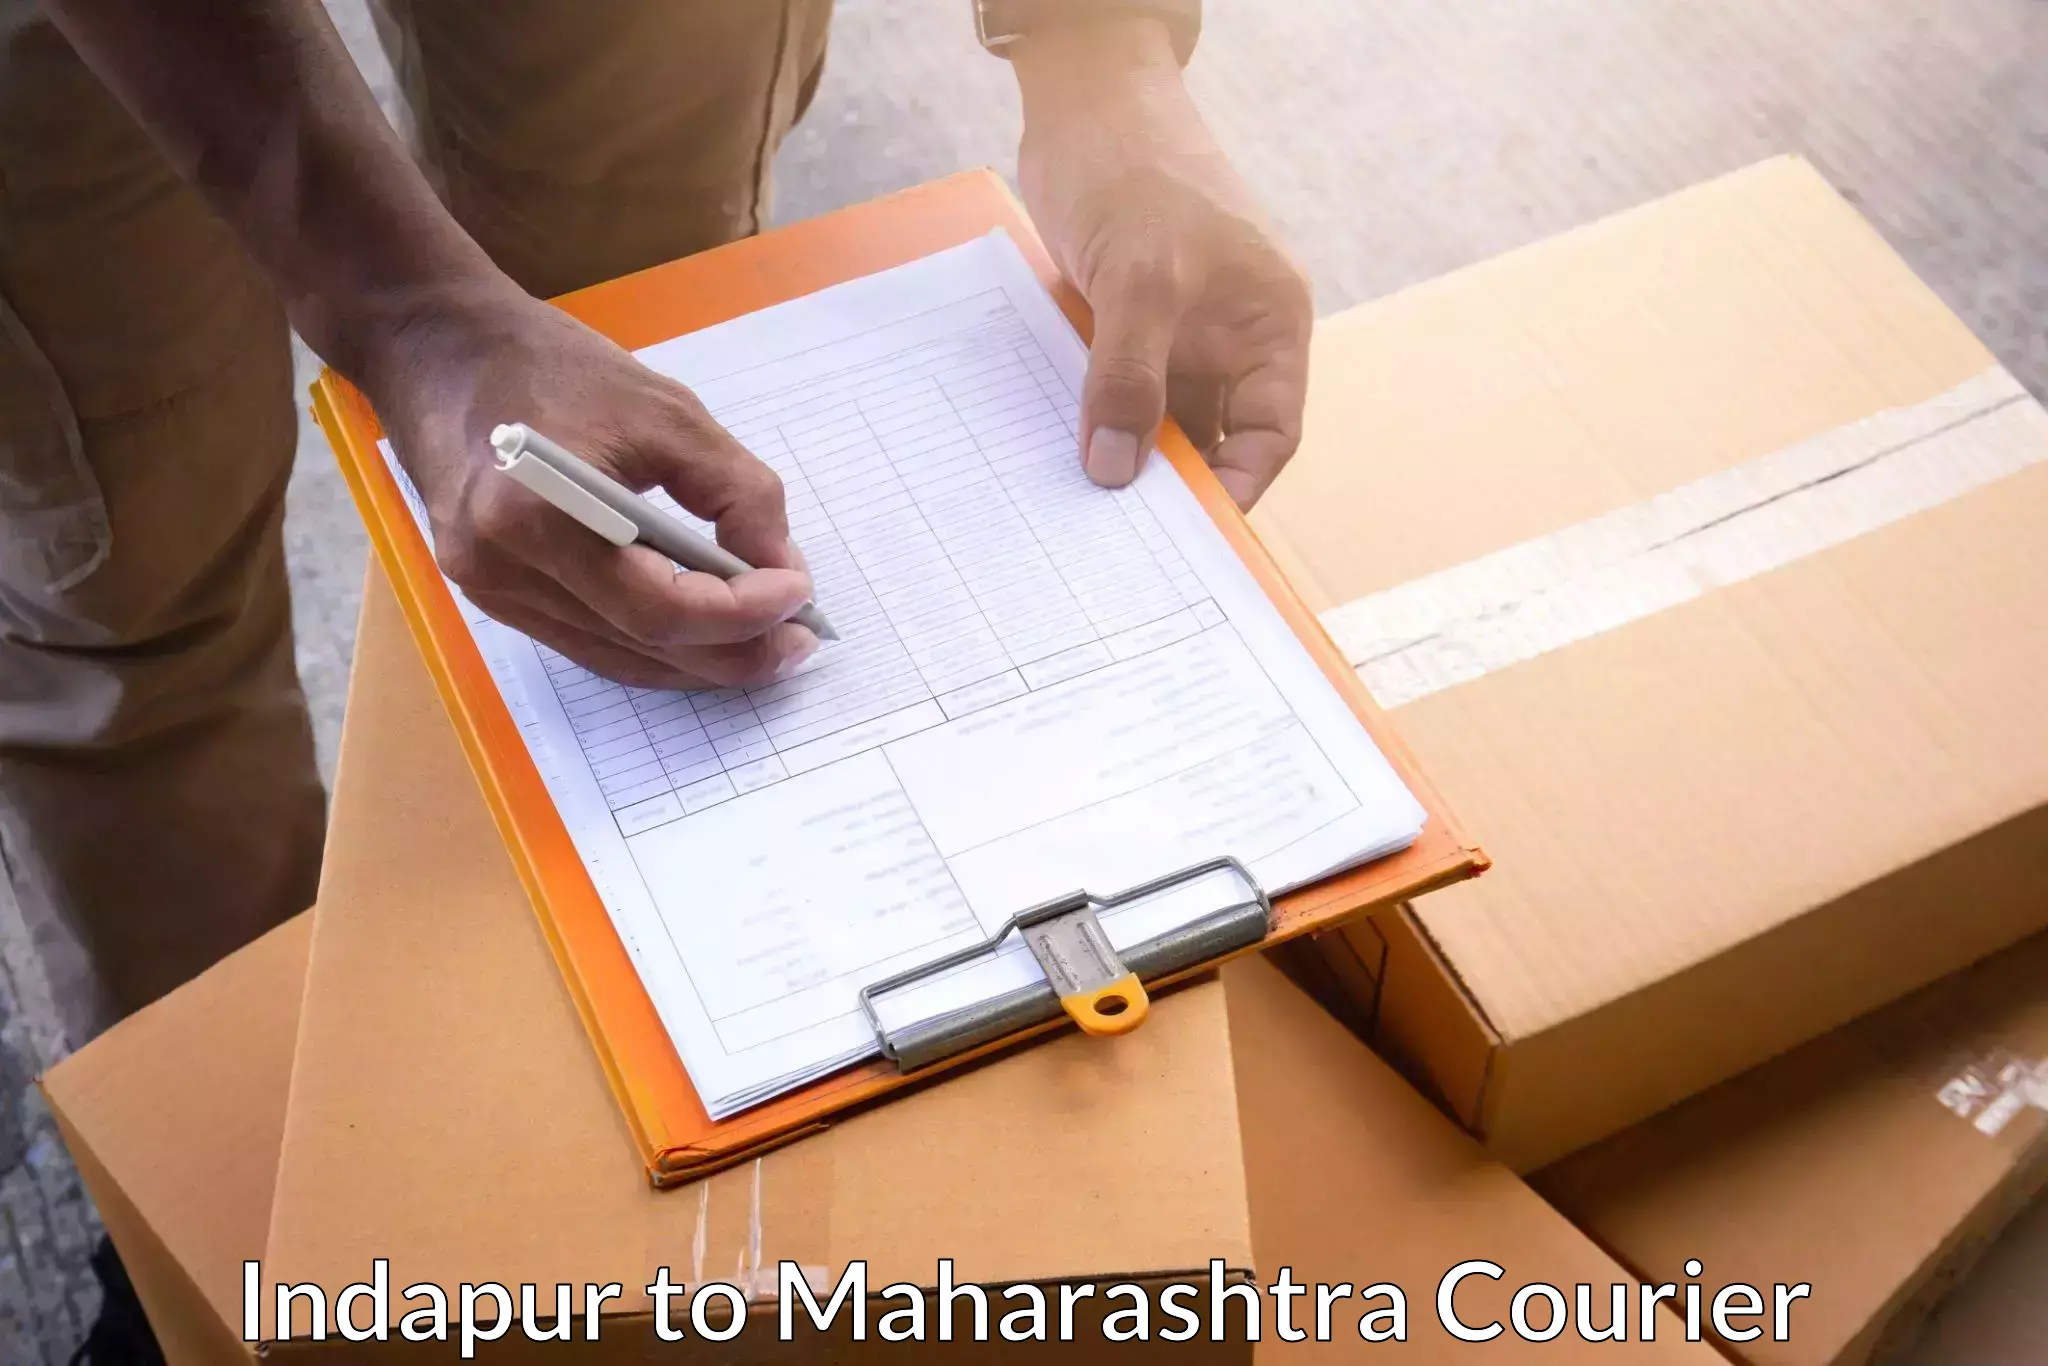 Customer-centric shipping in Indapur to Indapur